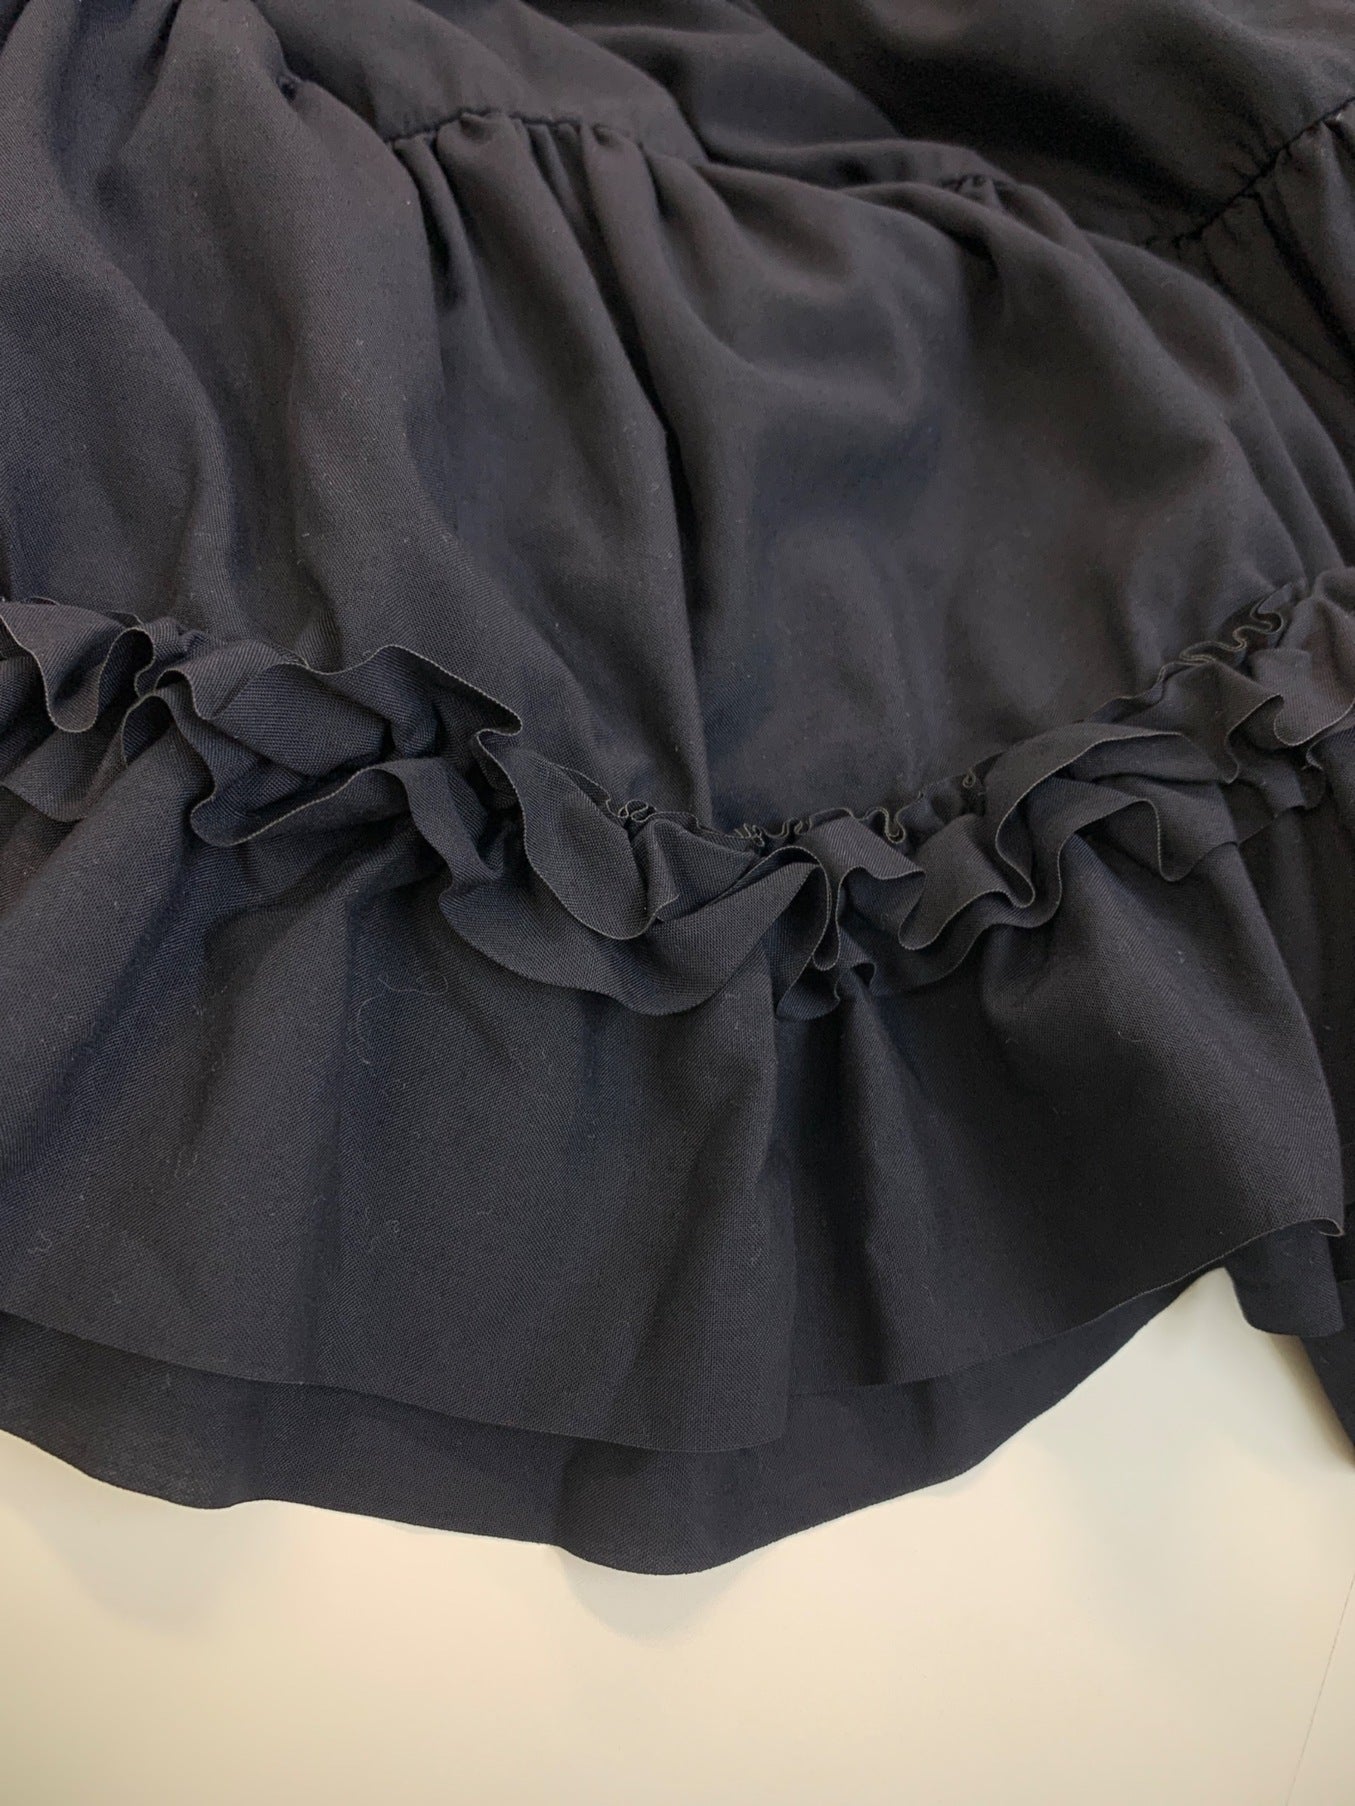 [Pre-owned] COMME des GARCONS GIRL Frilled Tiered Skirt / Long Flared Skirt NE-S014/AD2020